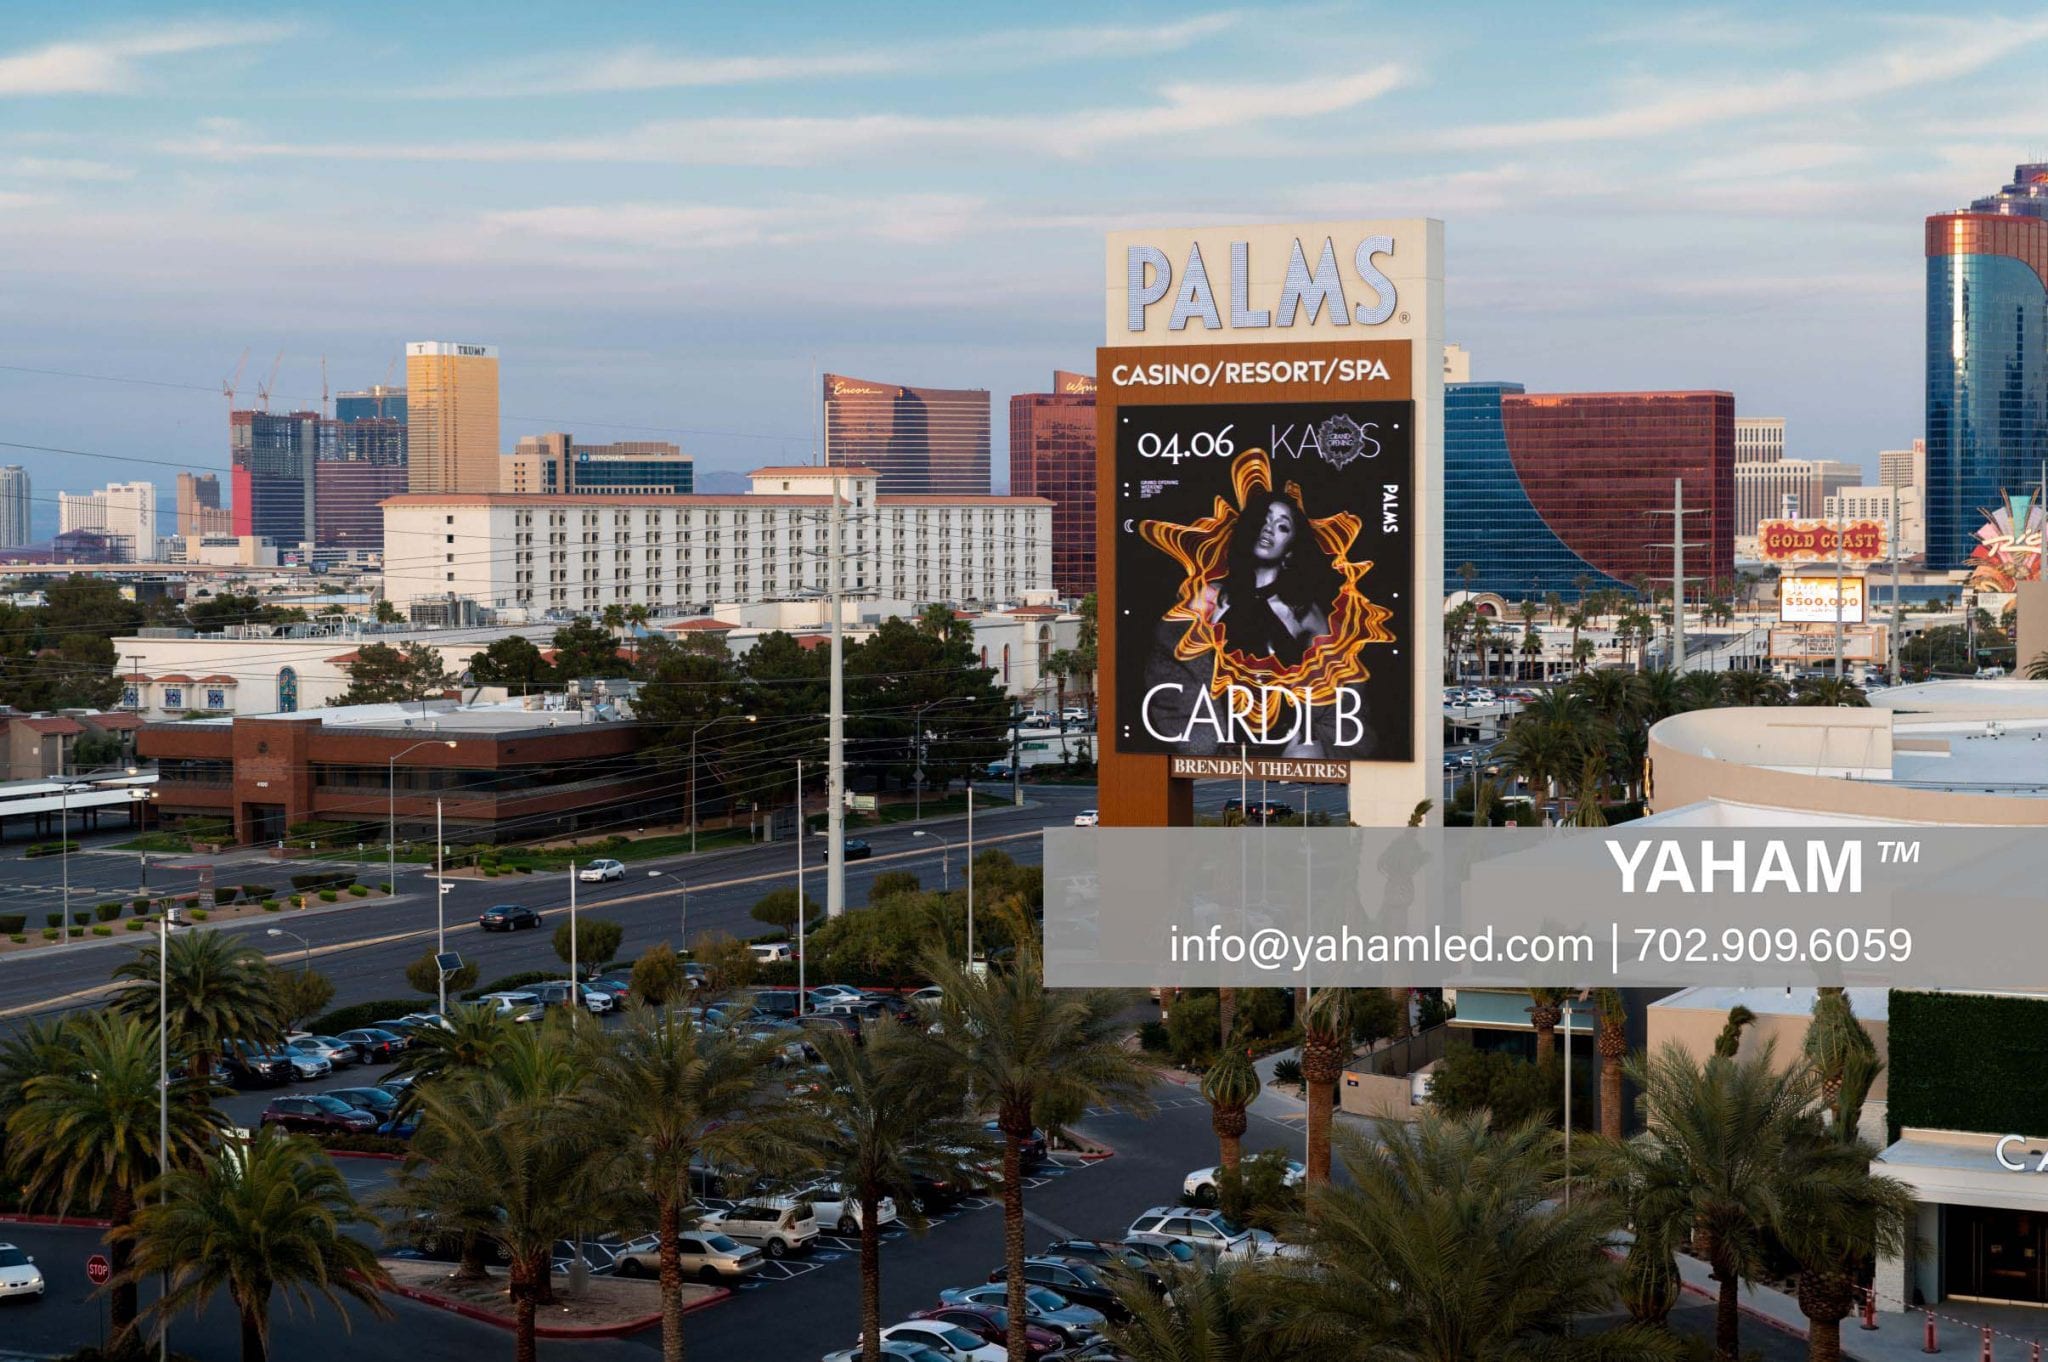 where is the palms stations casino located